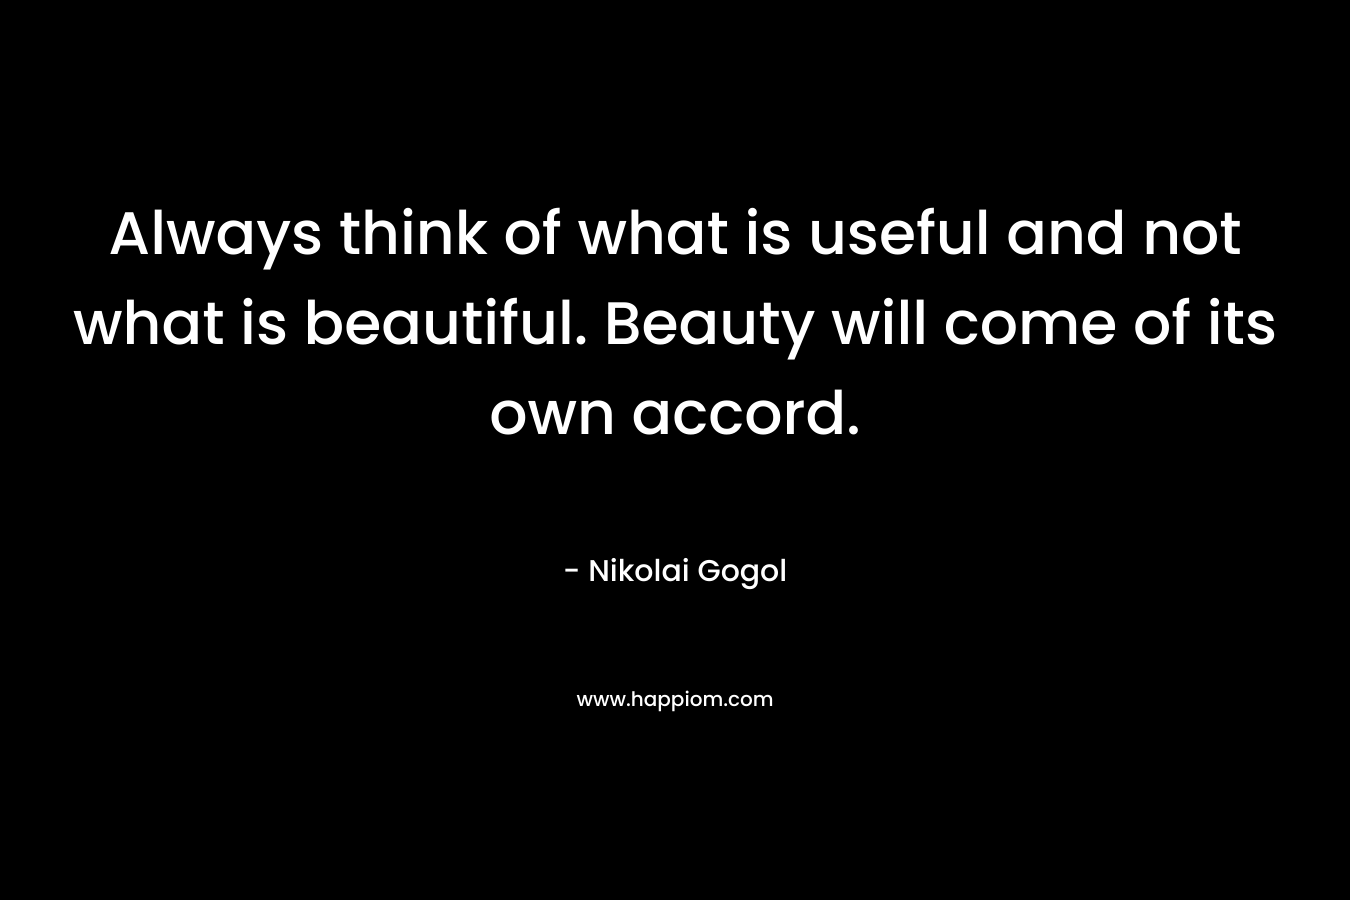 Always think of what is useful and not what is beautiful. Beauty will come of its own accord.